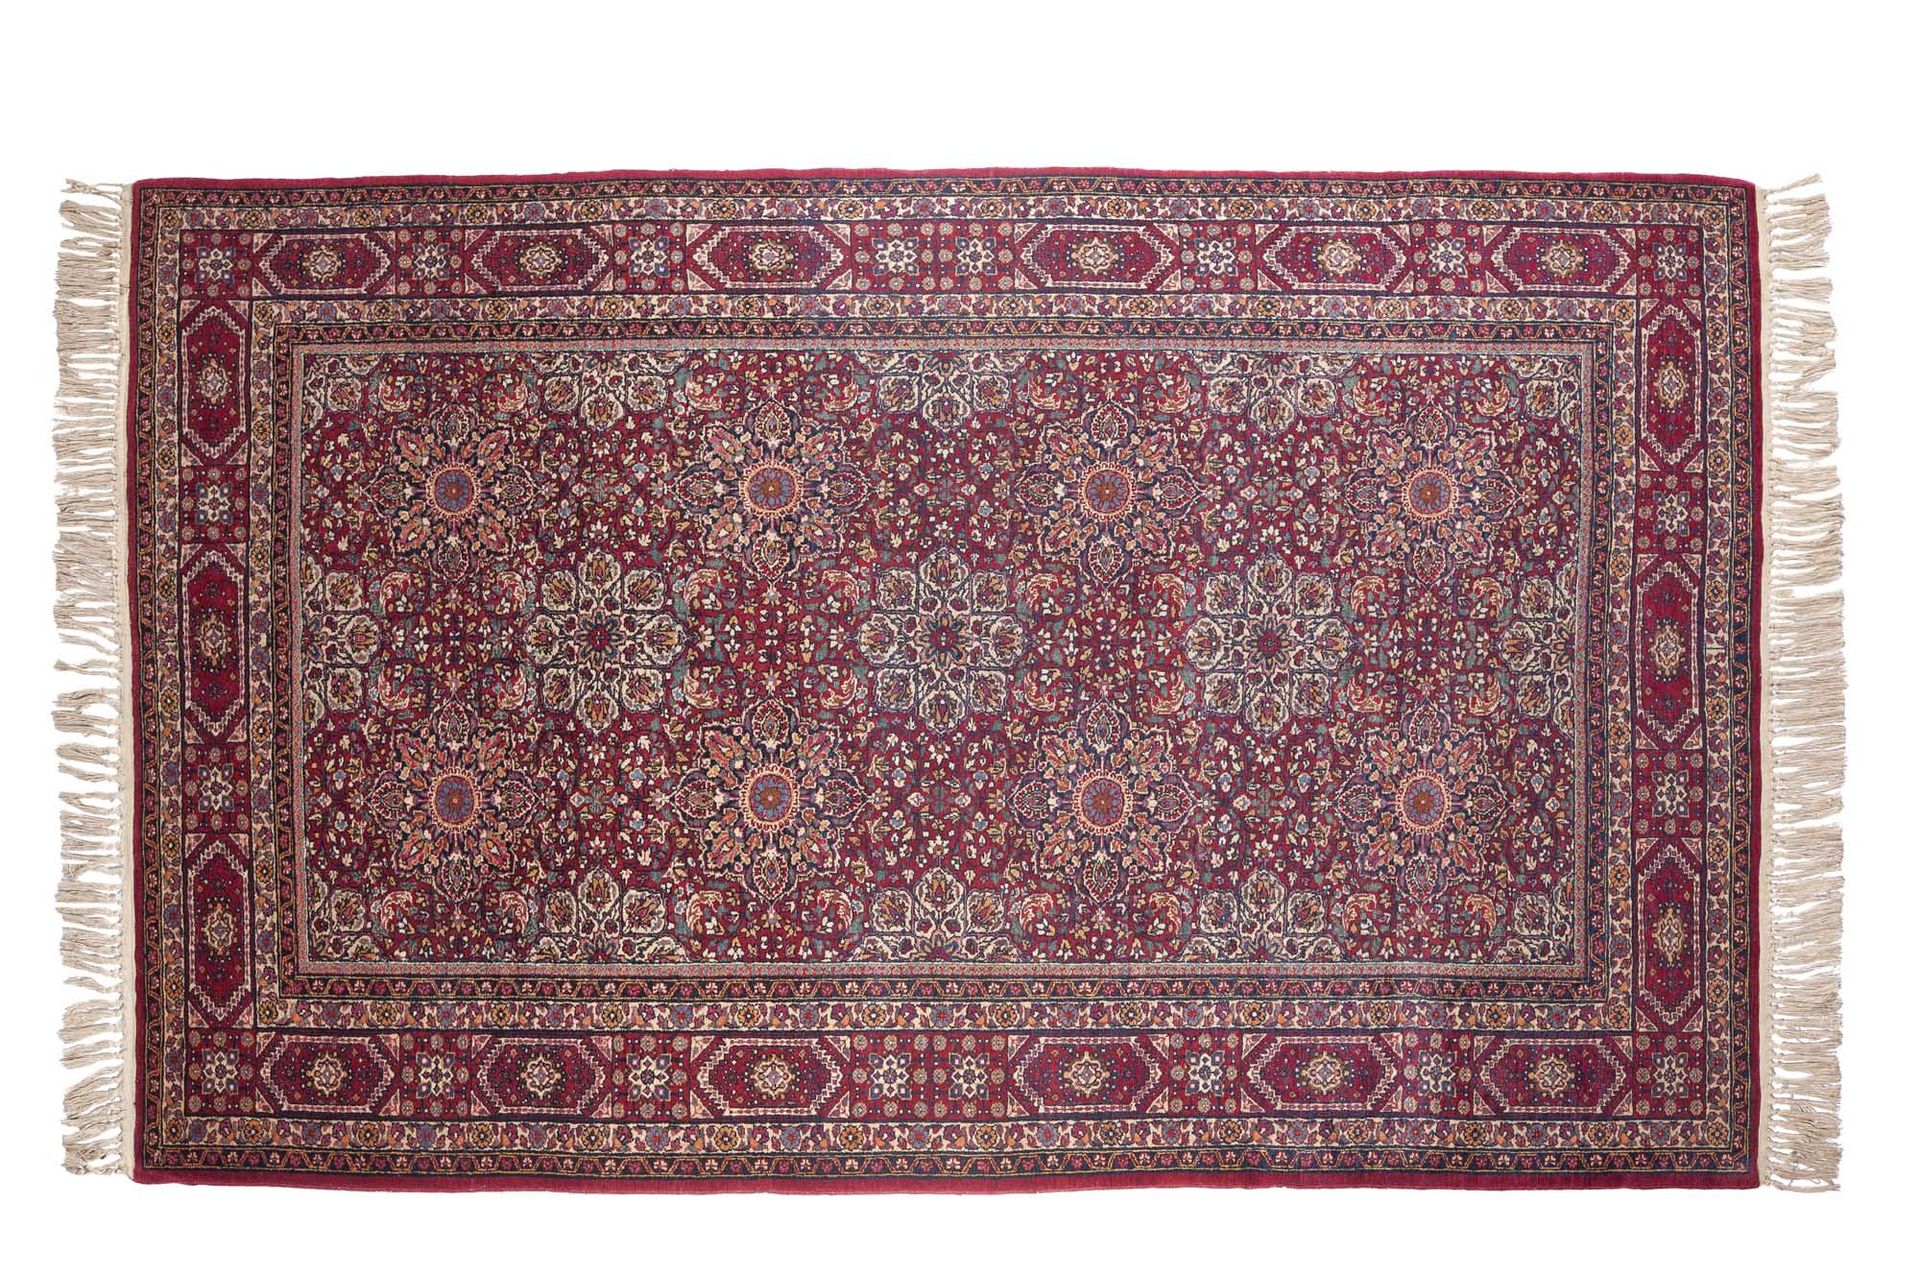 Null Tehran carpet (Persia), end of the 19th century

Dimensions : 200 x 140cm

&hellip;